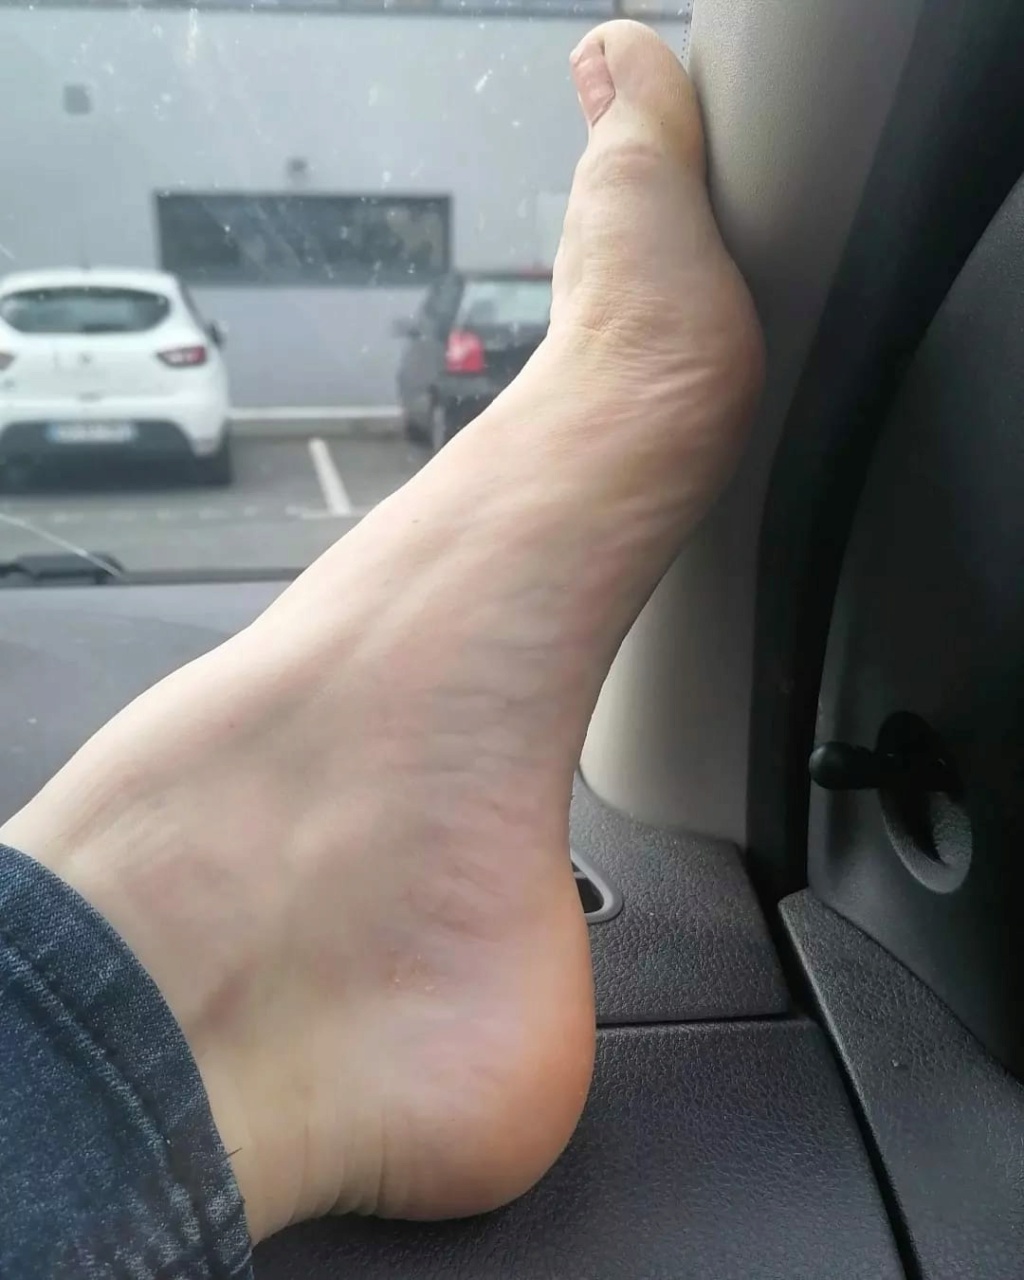 Pieds en voiture - Page 2 Img-2016